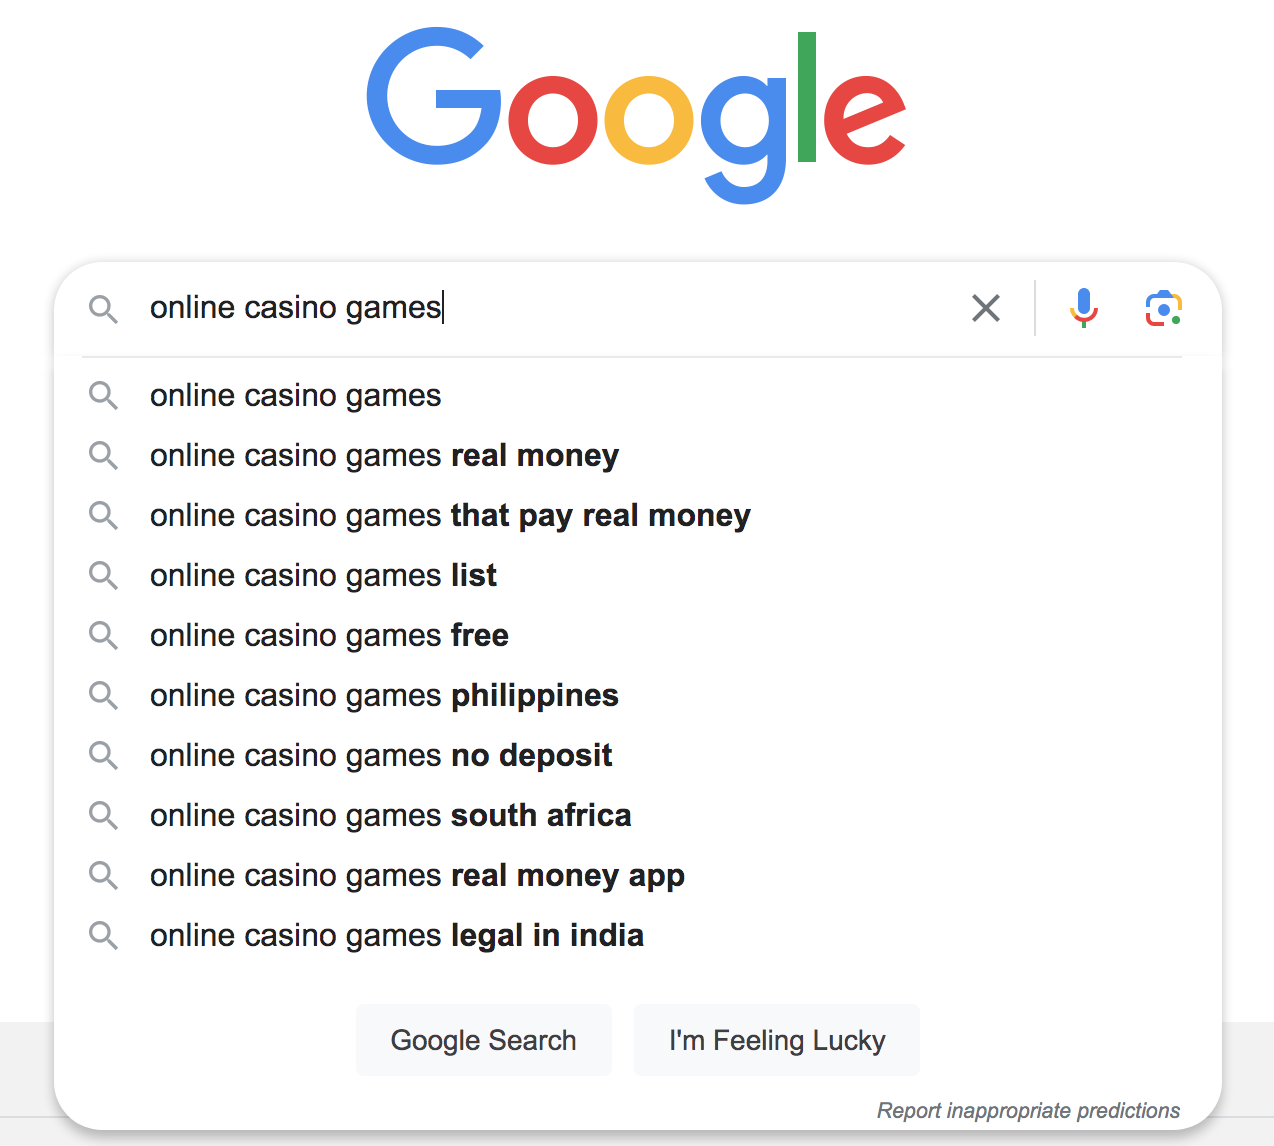 Google autocomplete suggestions when typing "online ****** games"